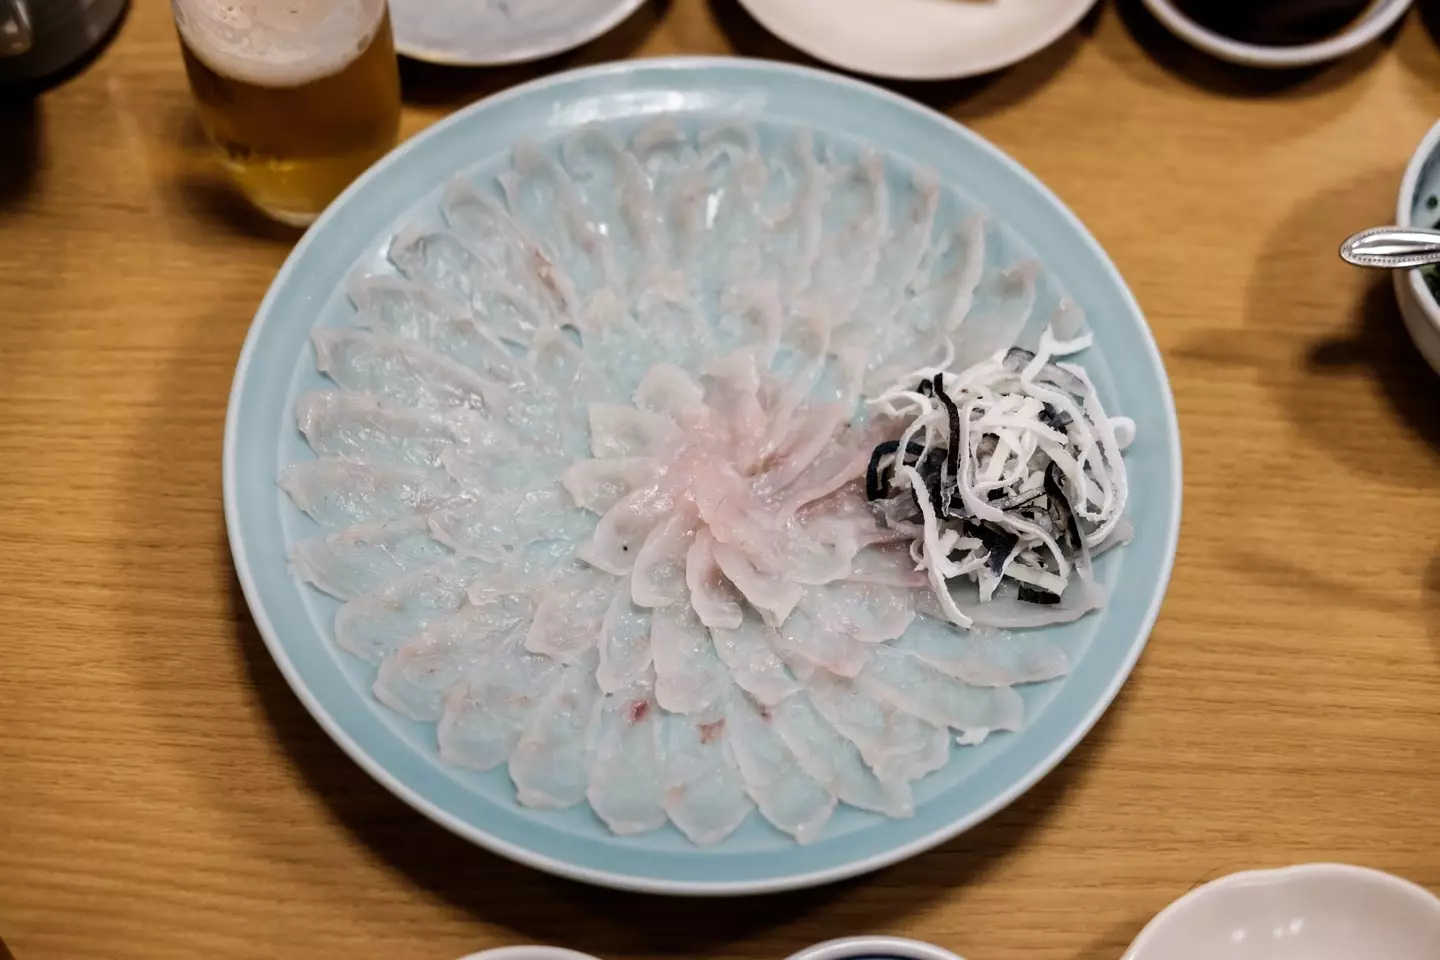 The deadly dish is often arranged in a flower formation to take your mind off the potential for fatal poisoning.